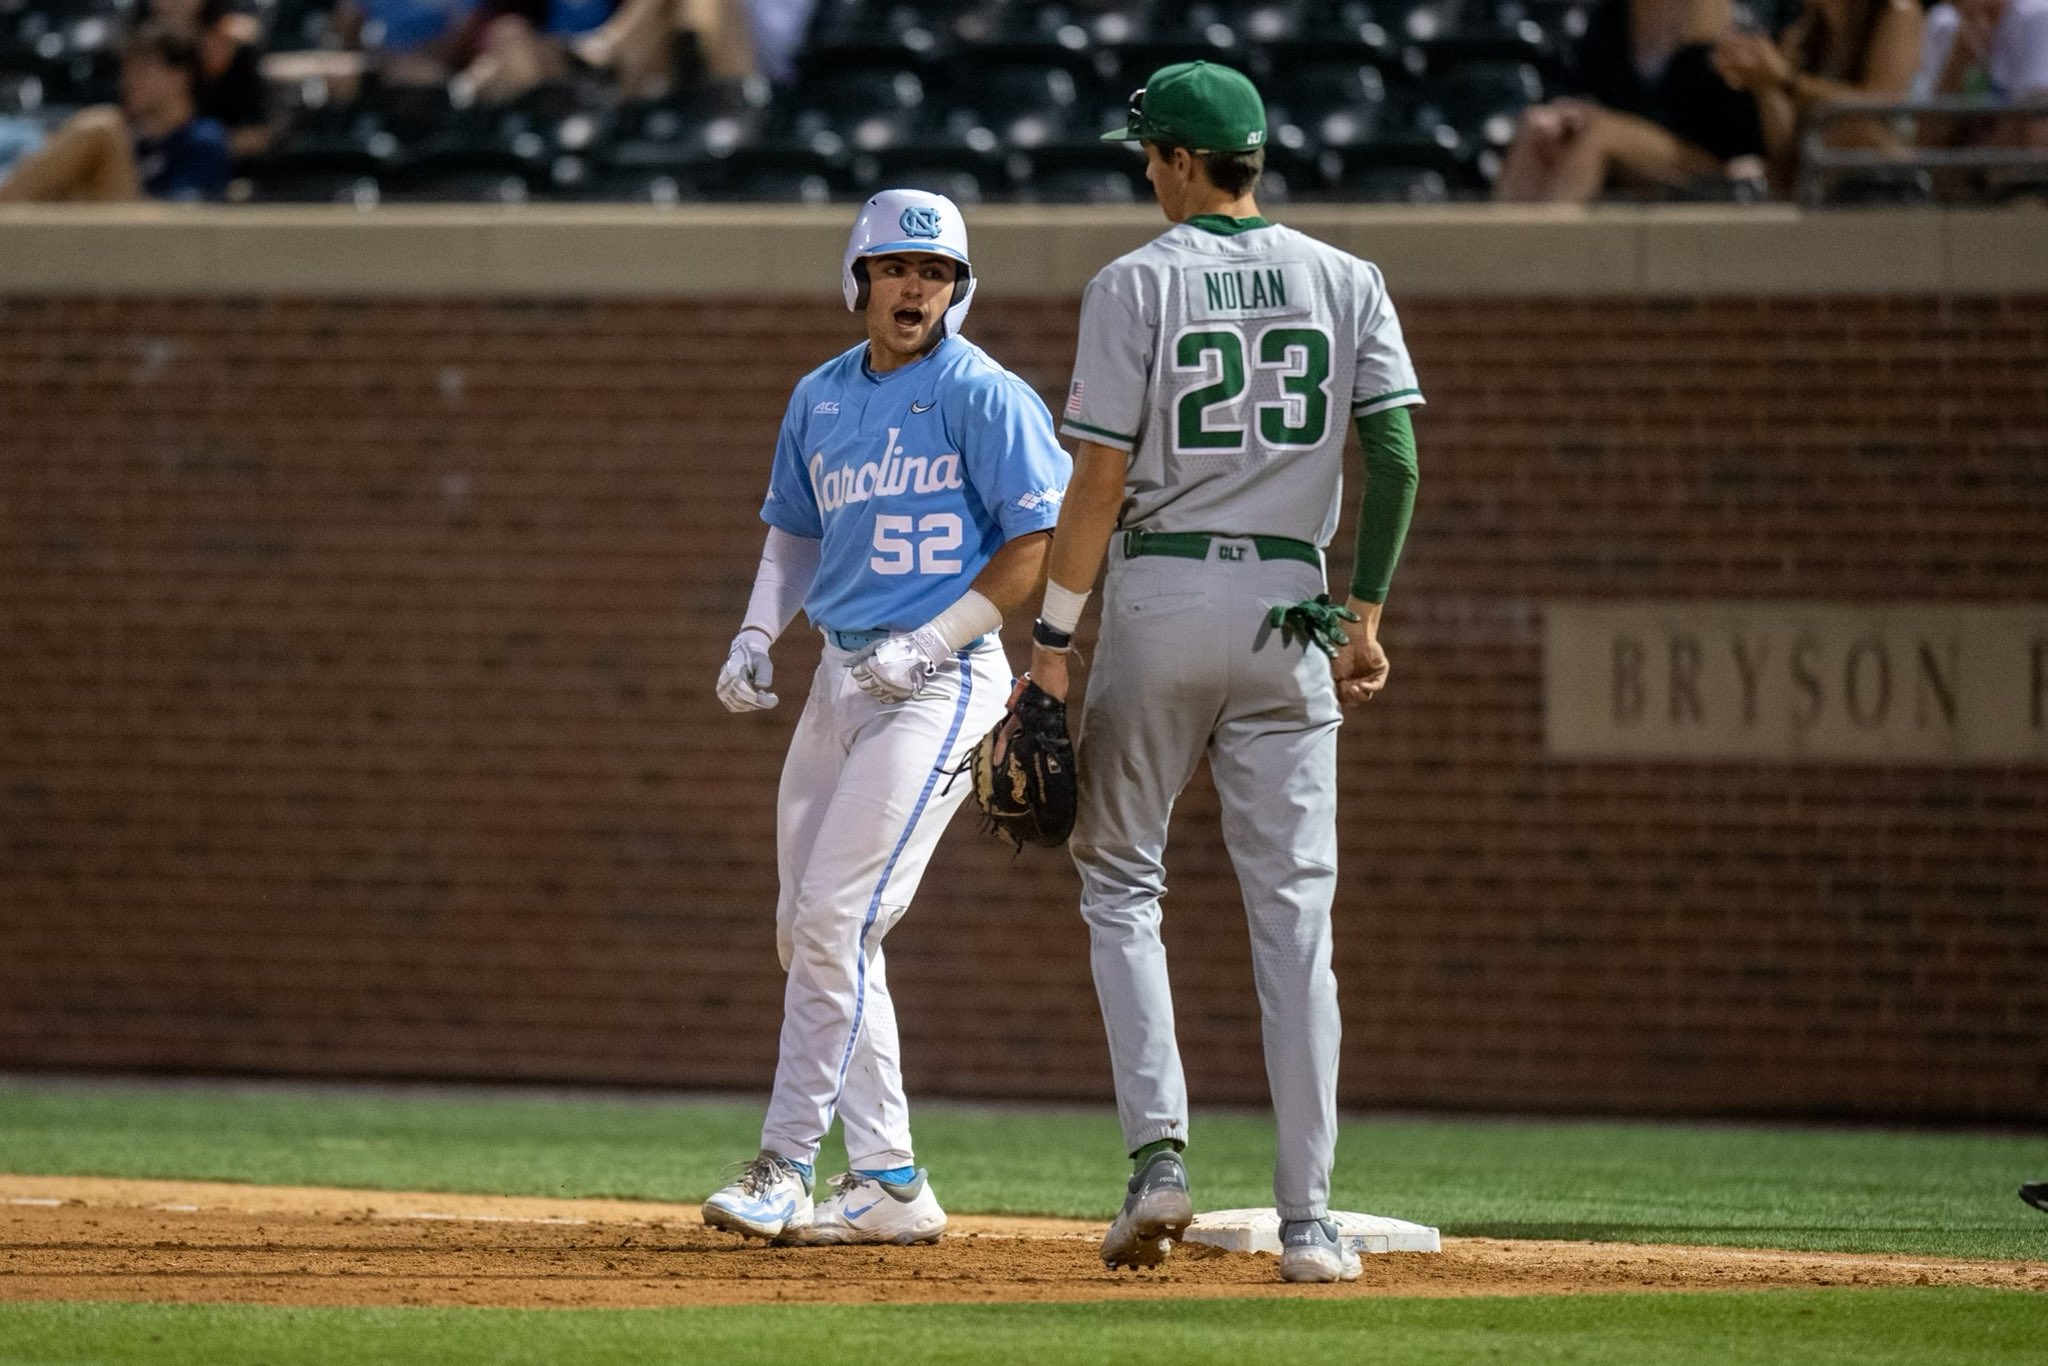 UNC Baseball Overcomes Missed Opportunities to Beat Charlotte